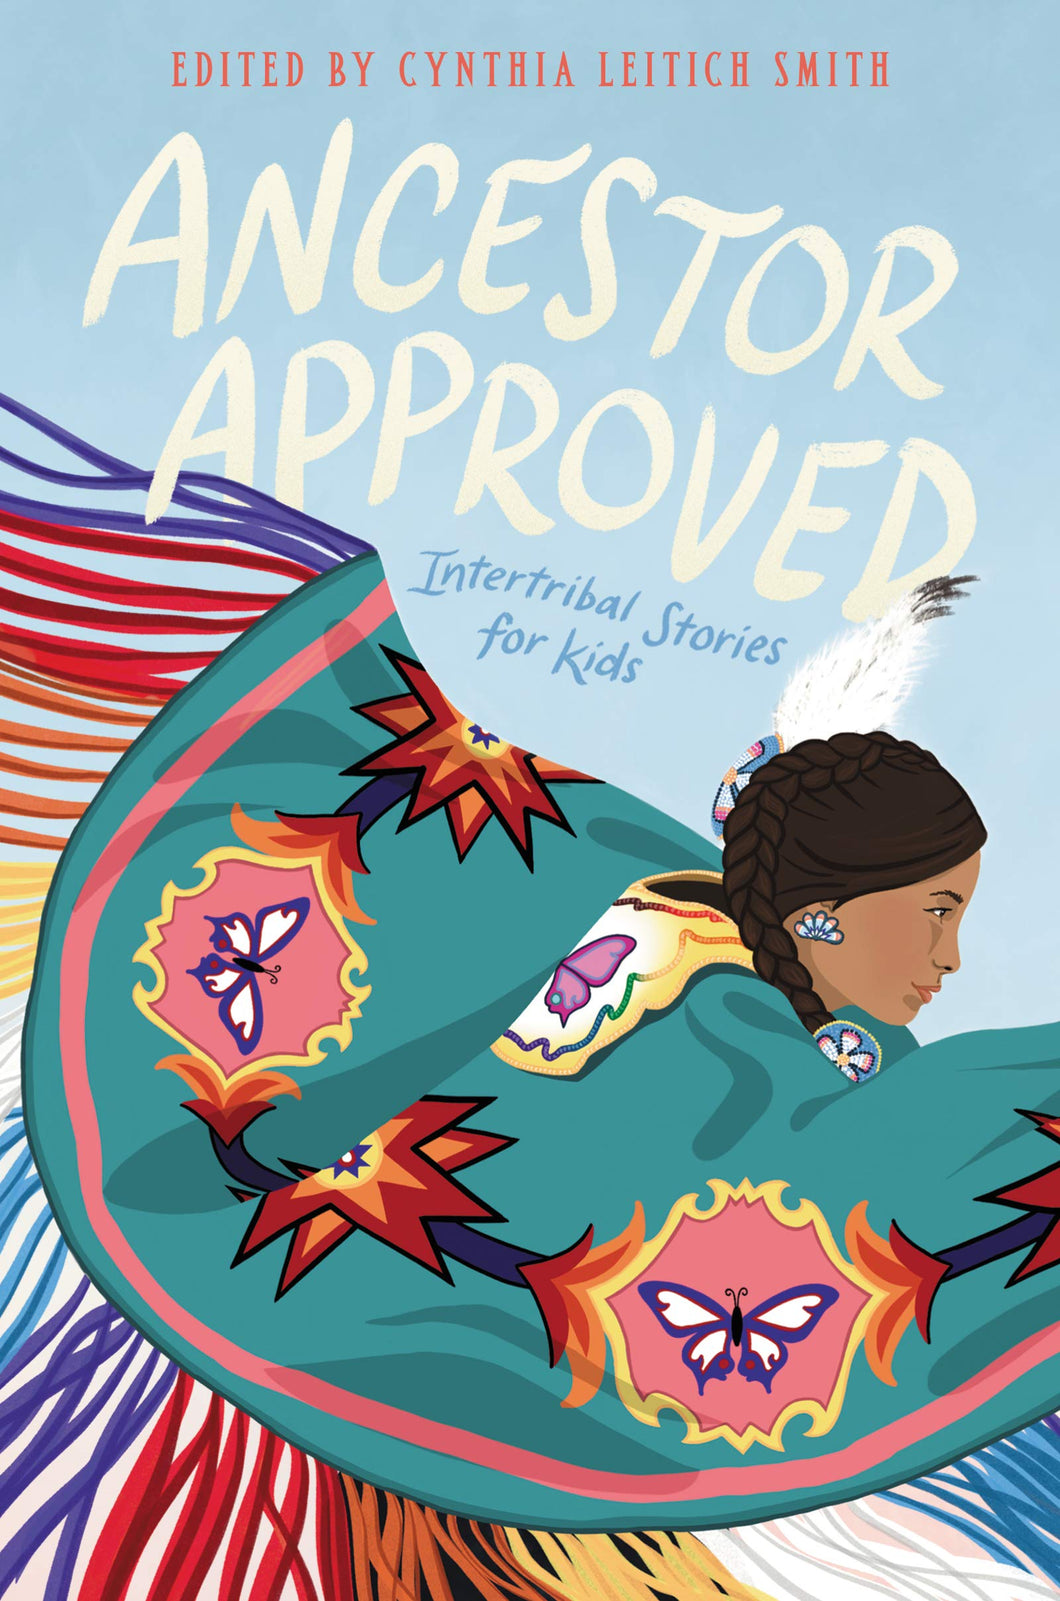 Ancestor Approved: Intertribal Stories for Kids [Edited by Cynthia L Smith]